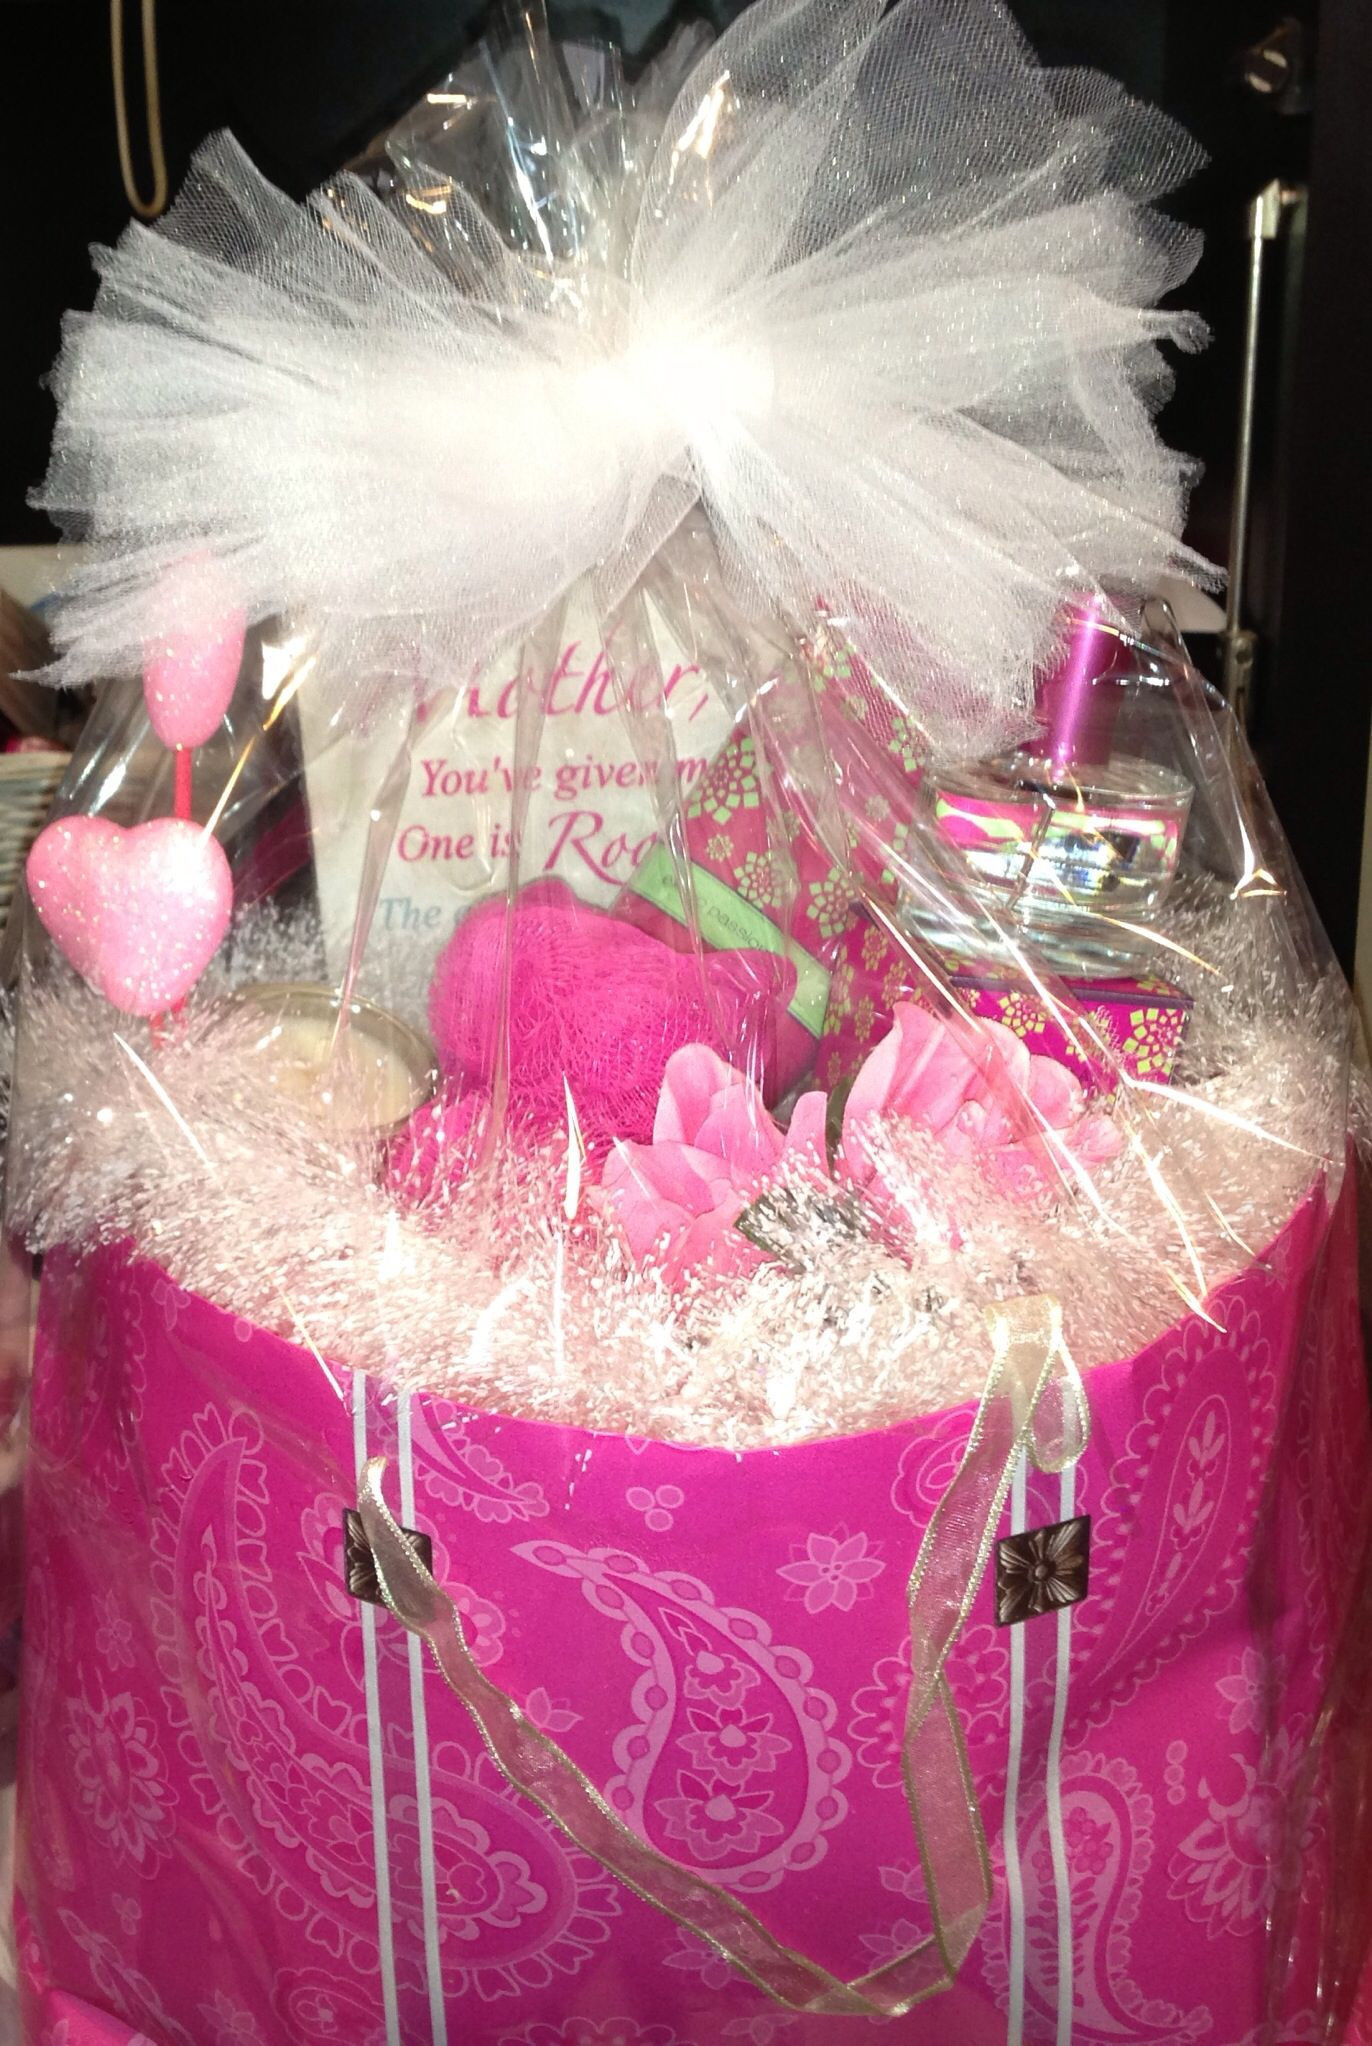 Mary Kay Mother'S Day Gift Basket Ideas
 The top 30 Ideas About Mary Kay Mother s Day Gift Ideas